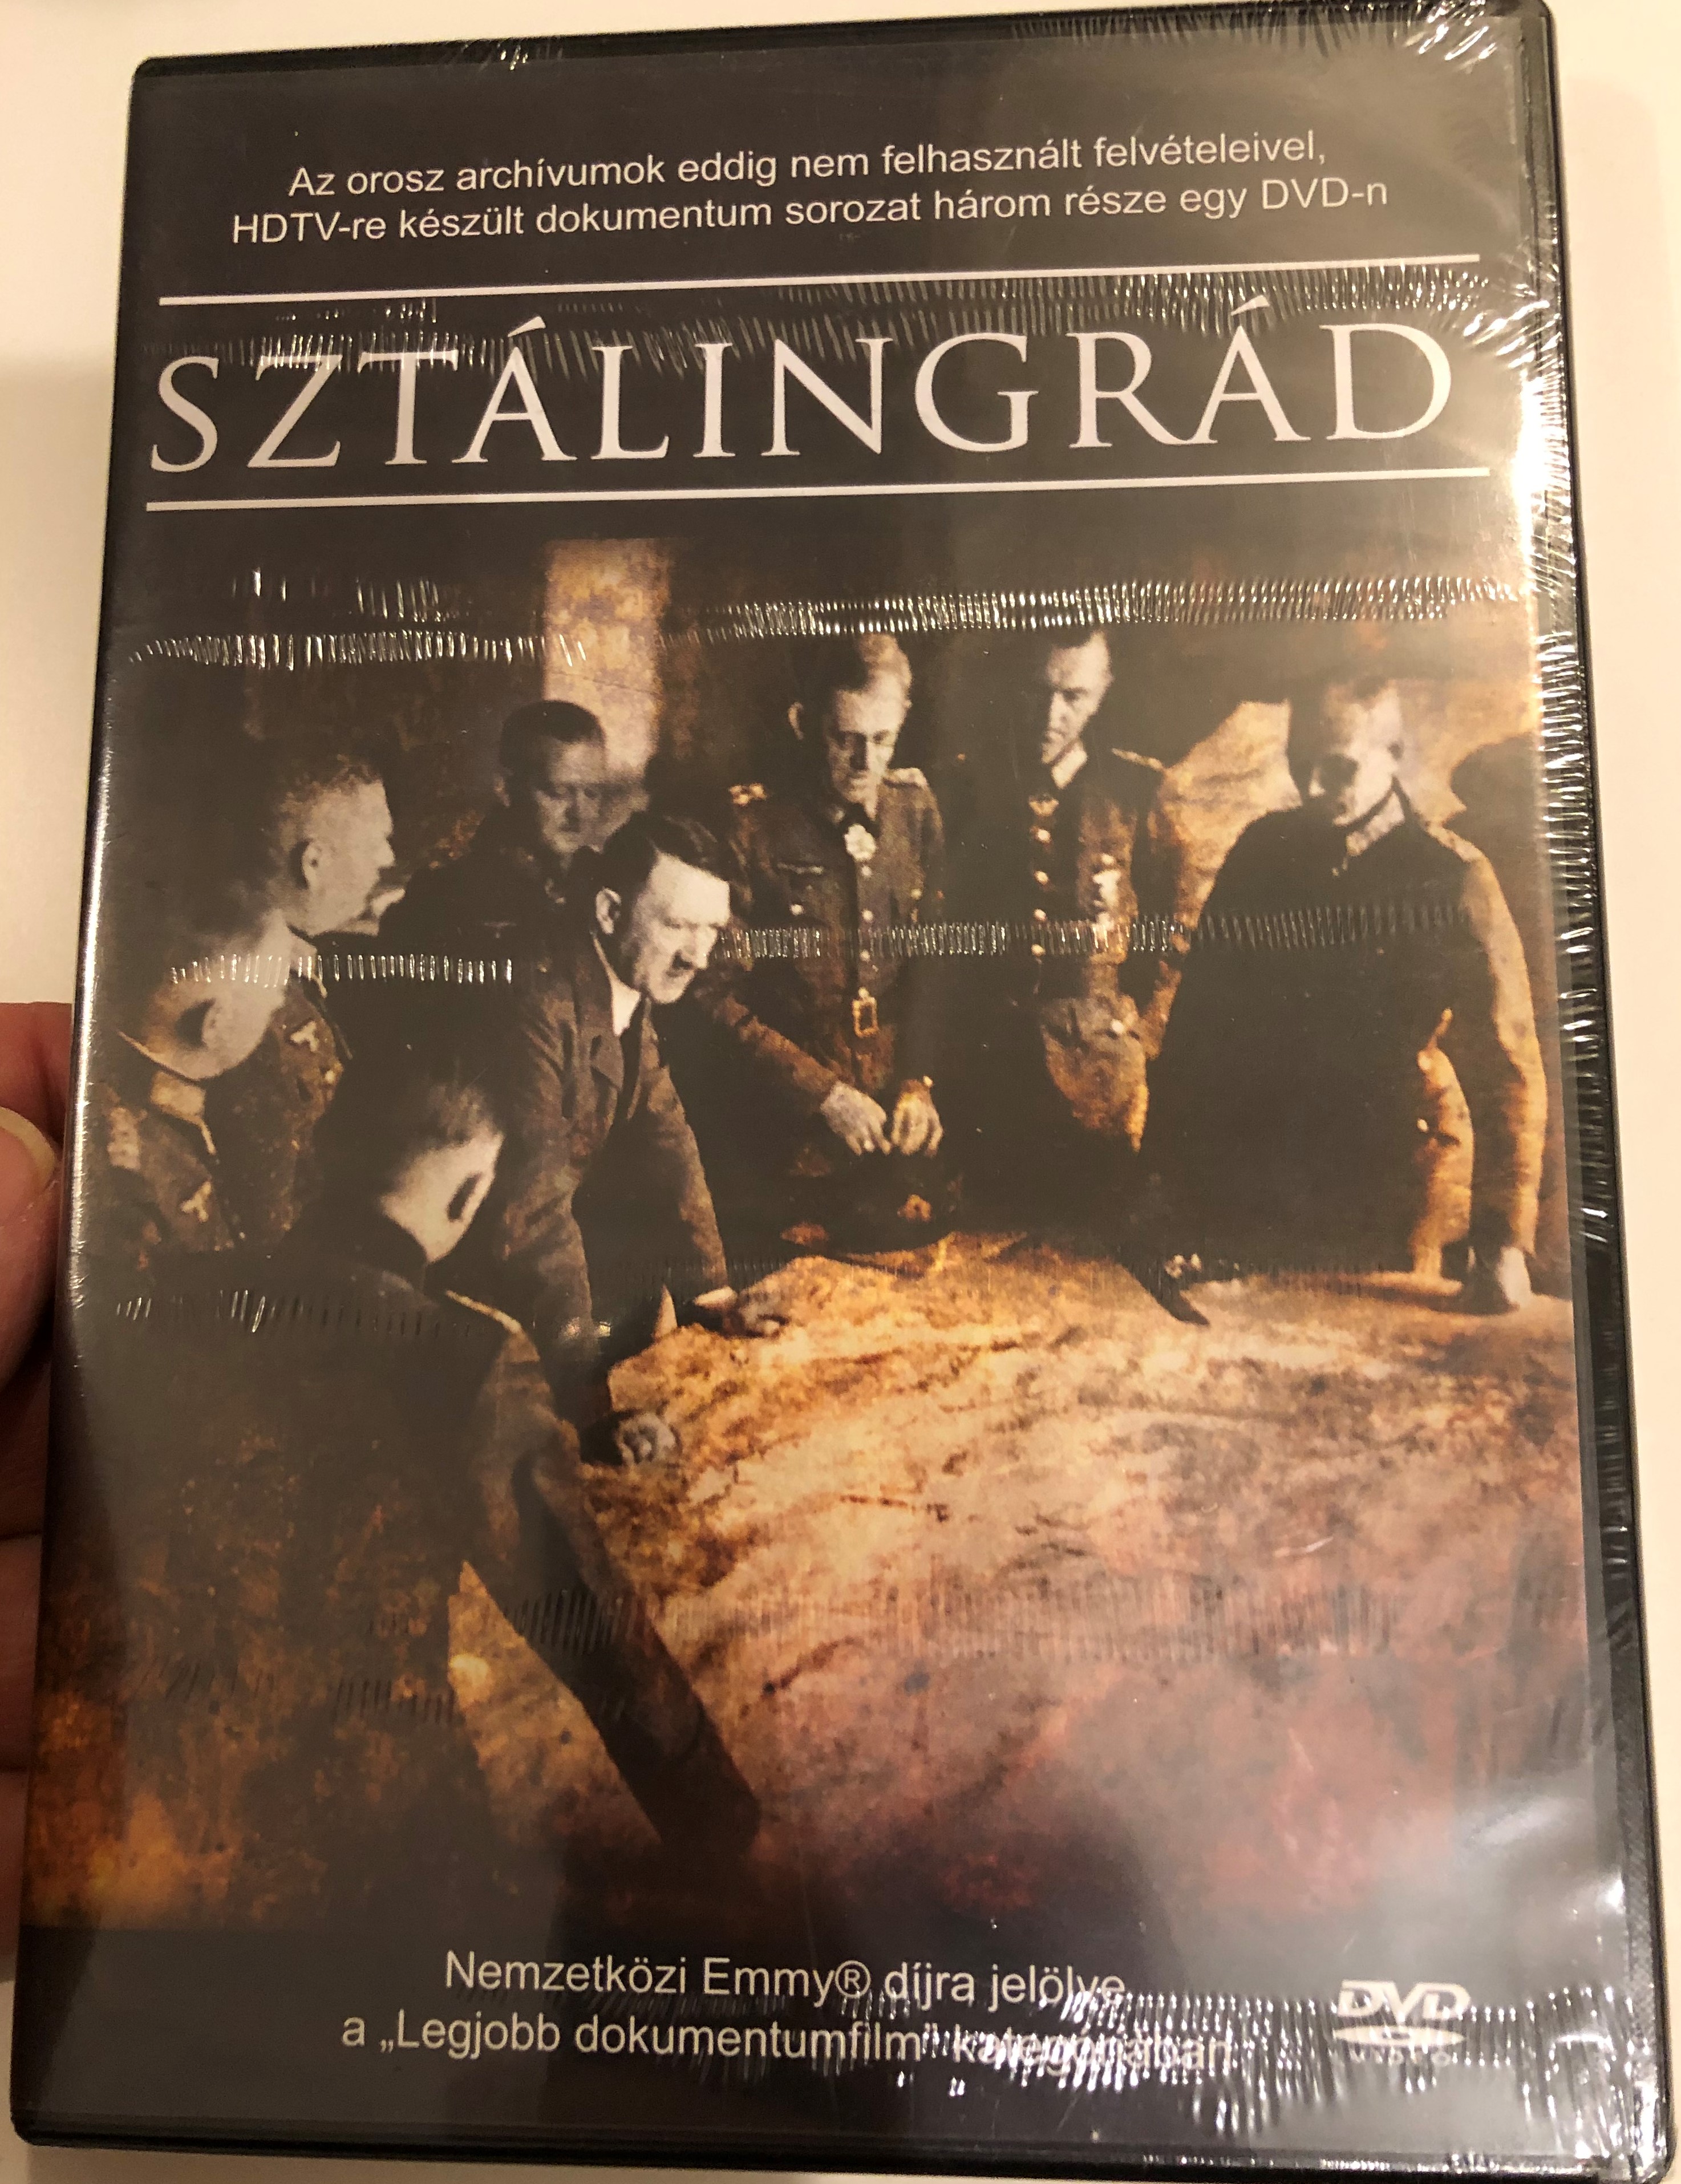 stalingrad-dvd-szt-lingr-d-documentary-trilogy-3-episodes-never-before-seen-footages-from-russian-archives-1-.jpg